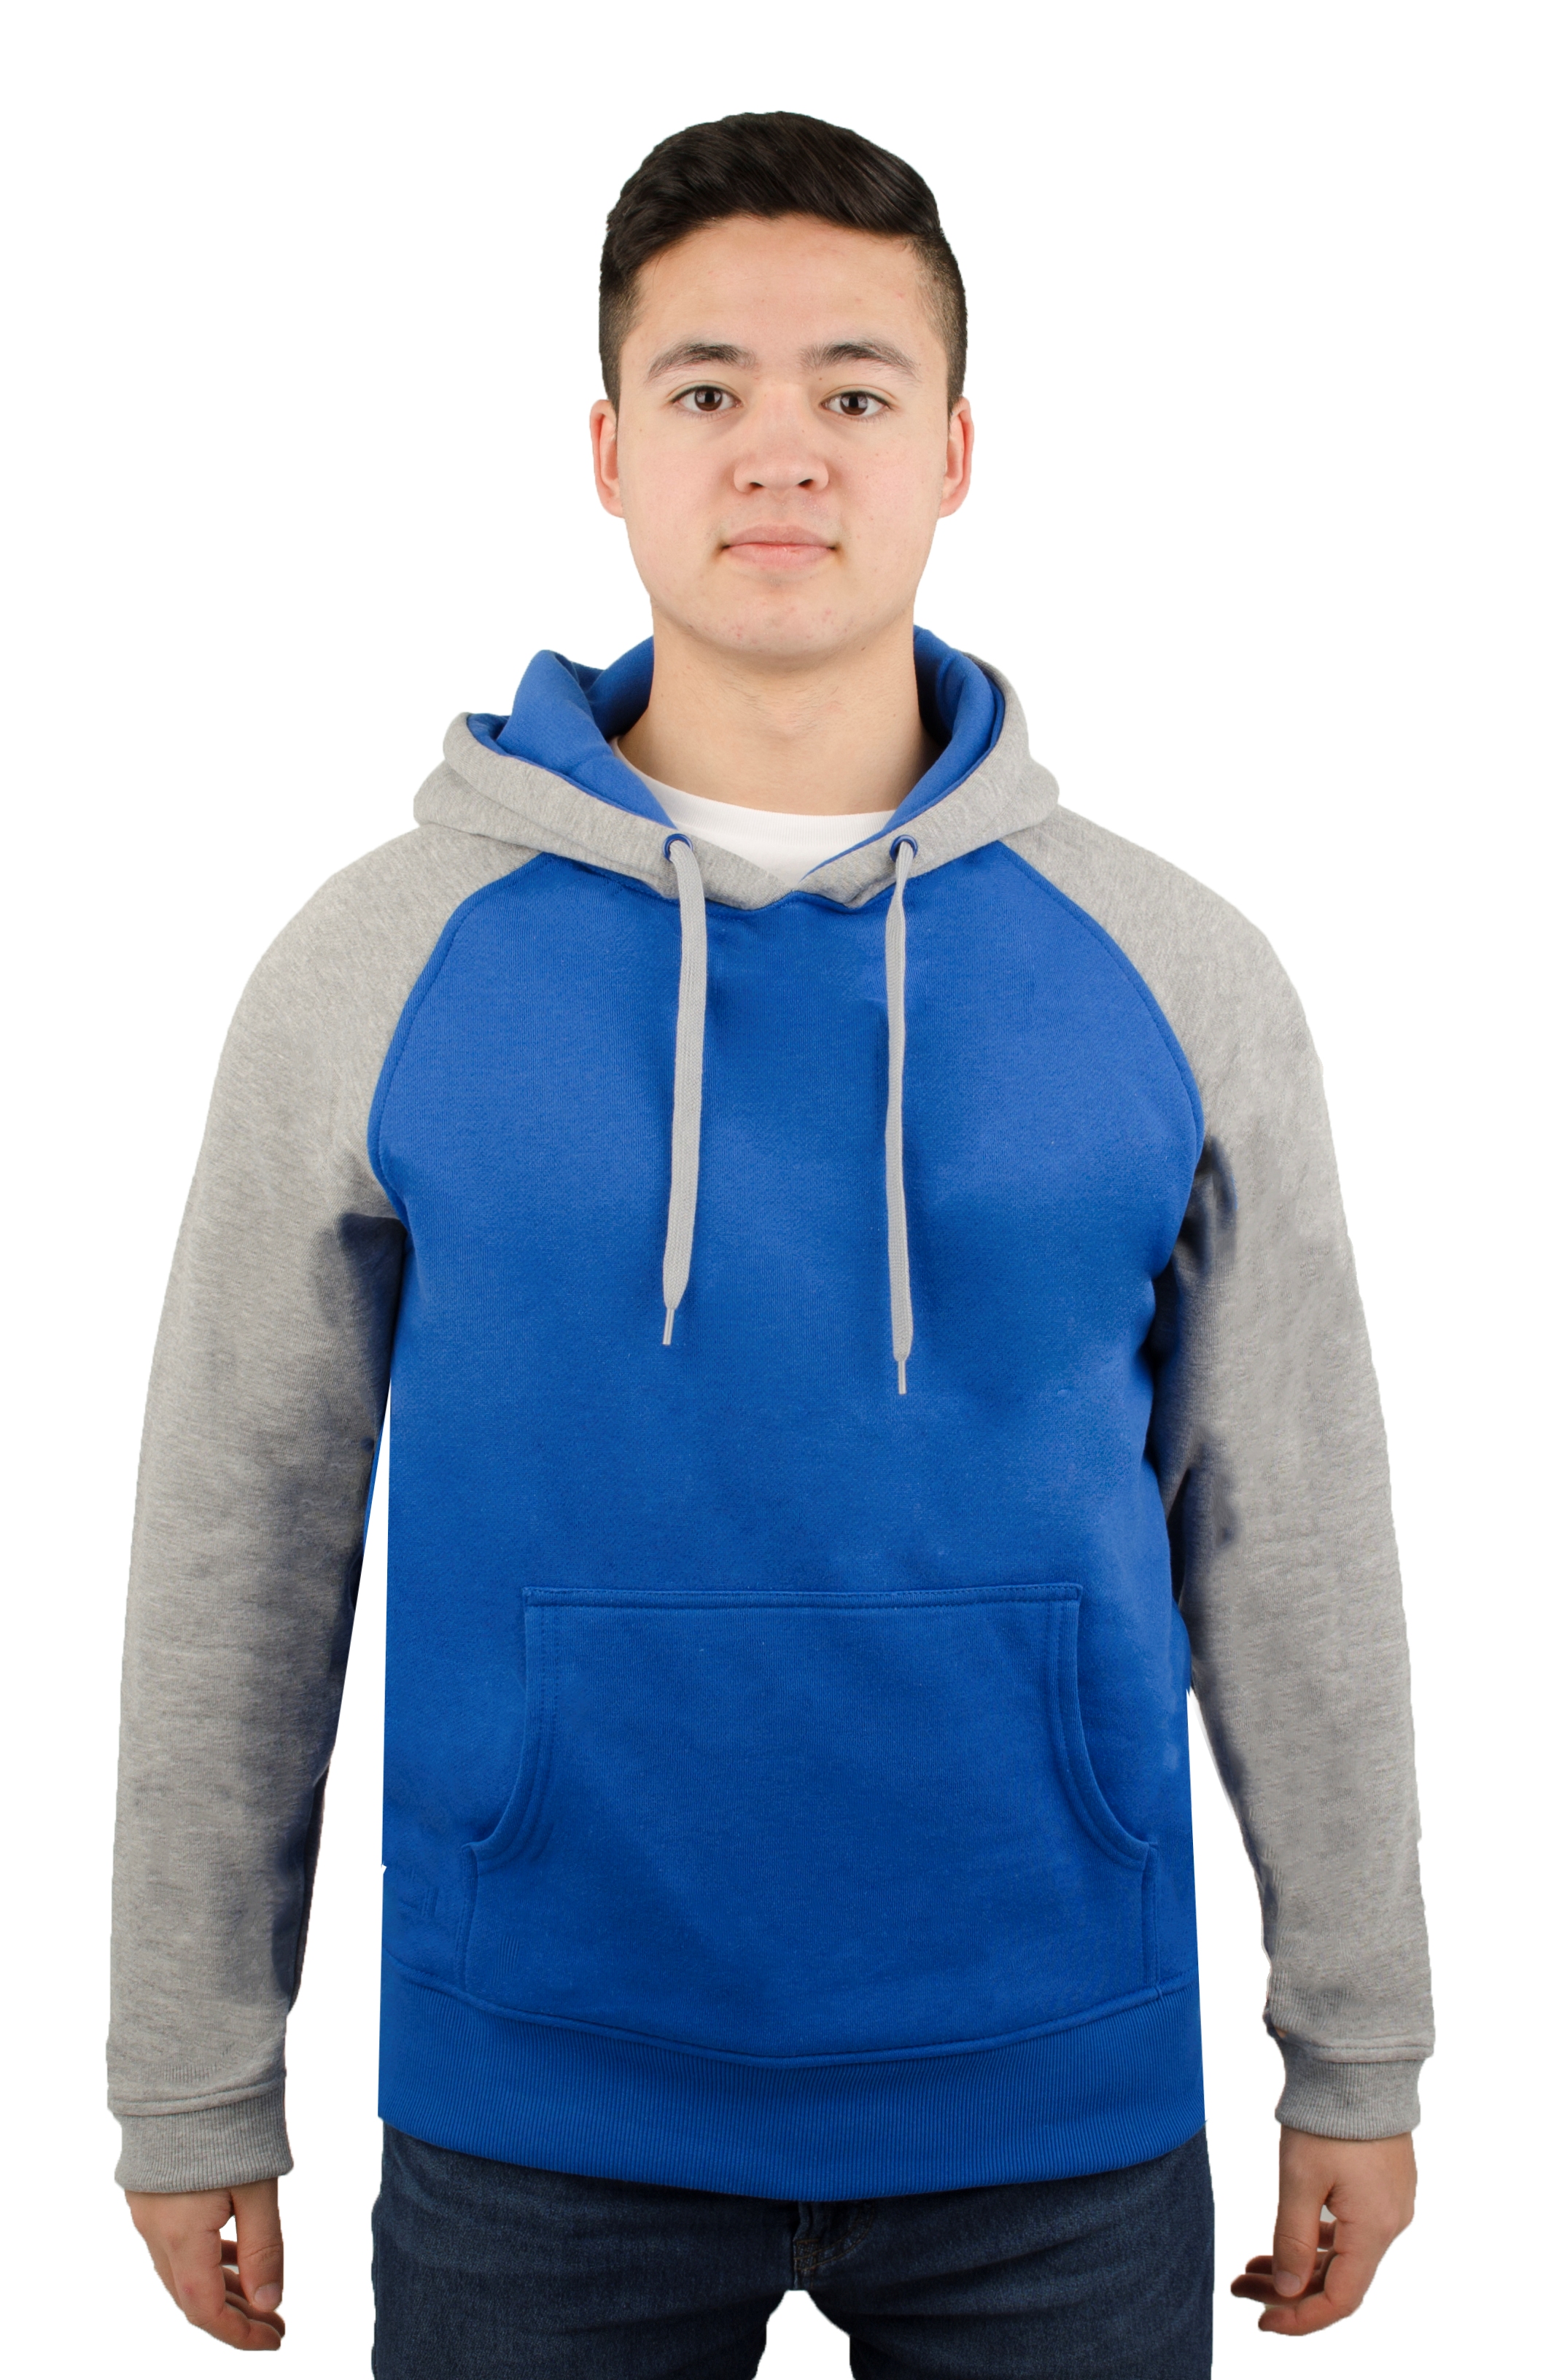 Adult 2 Tone Pullover Hooded Sweatshirt (Style #BH3030 )